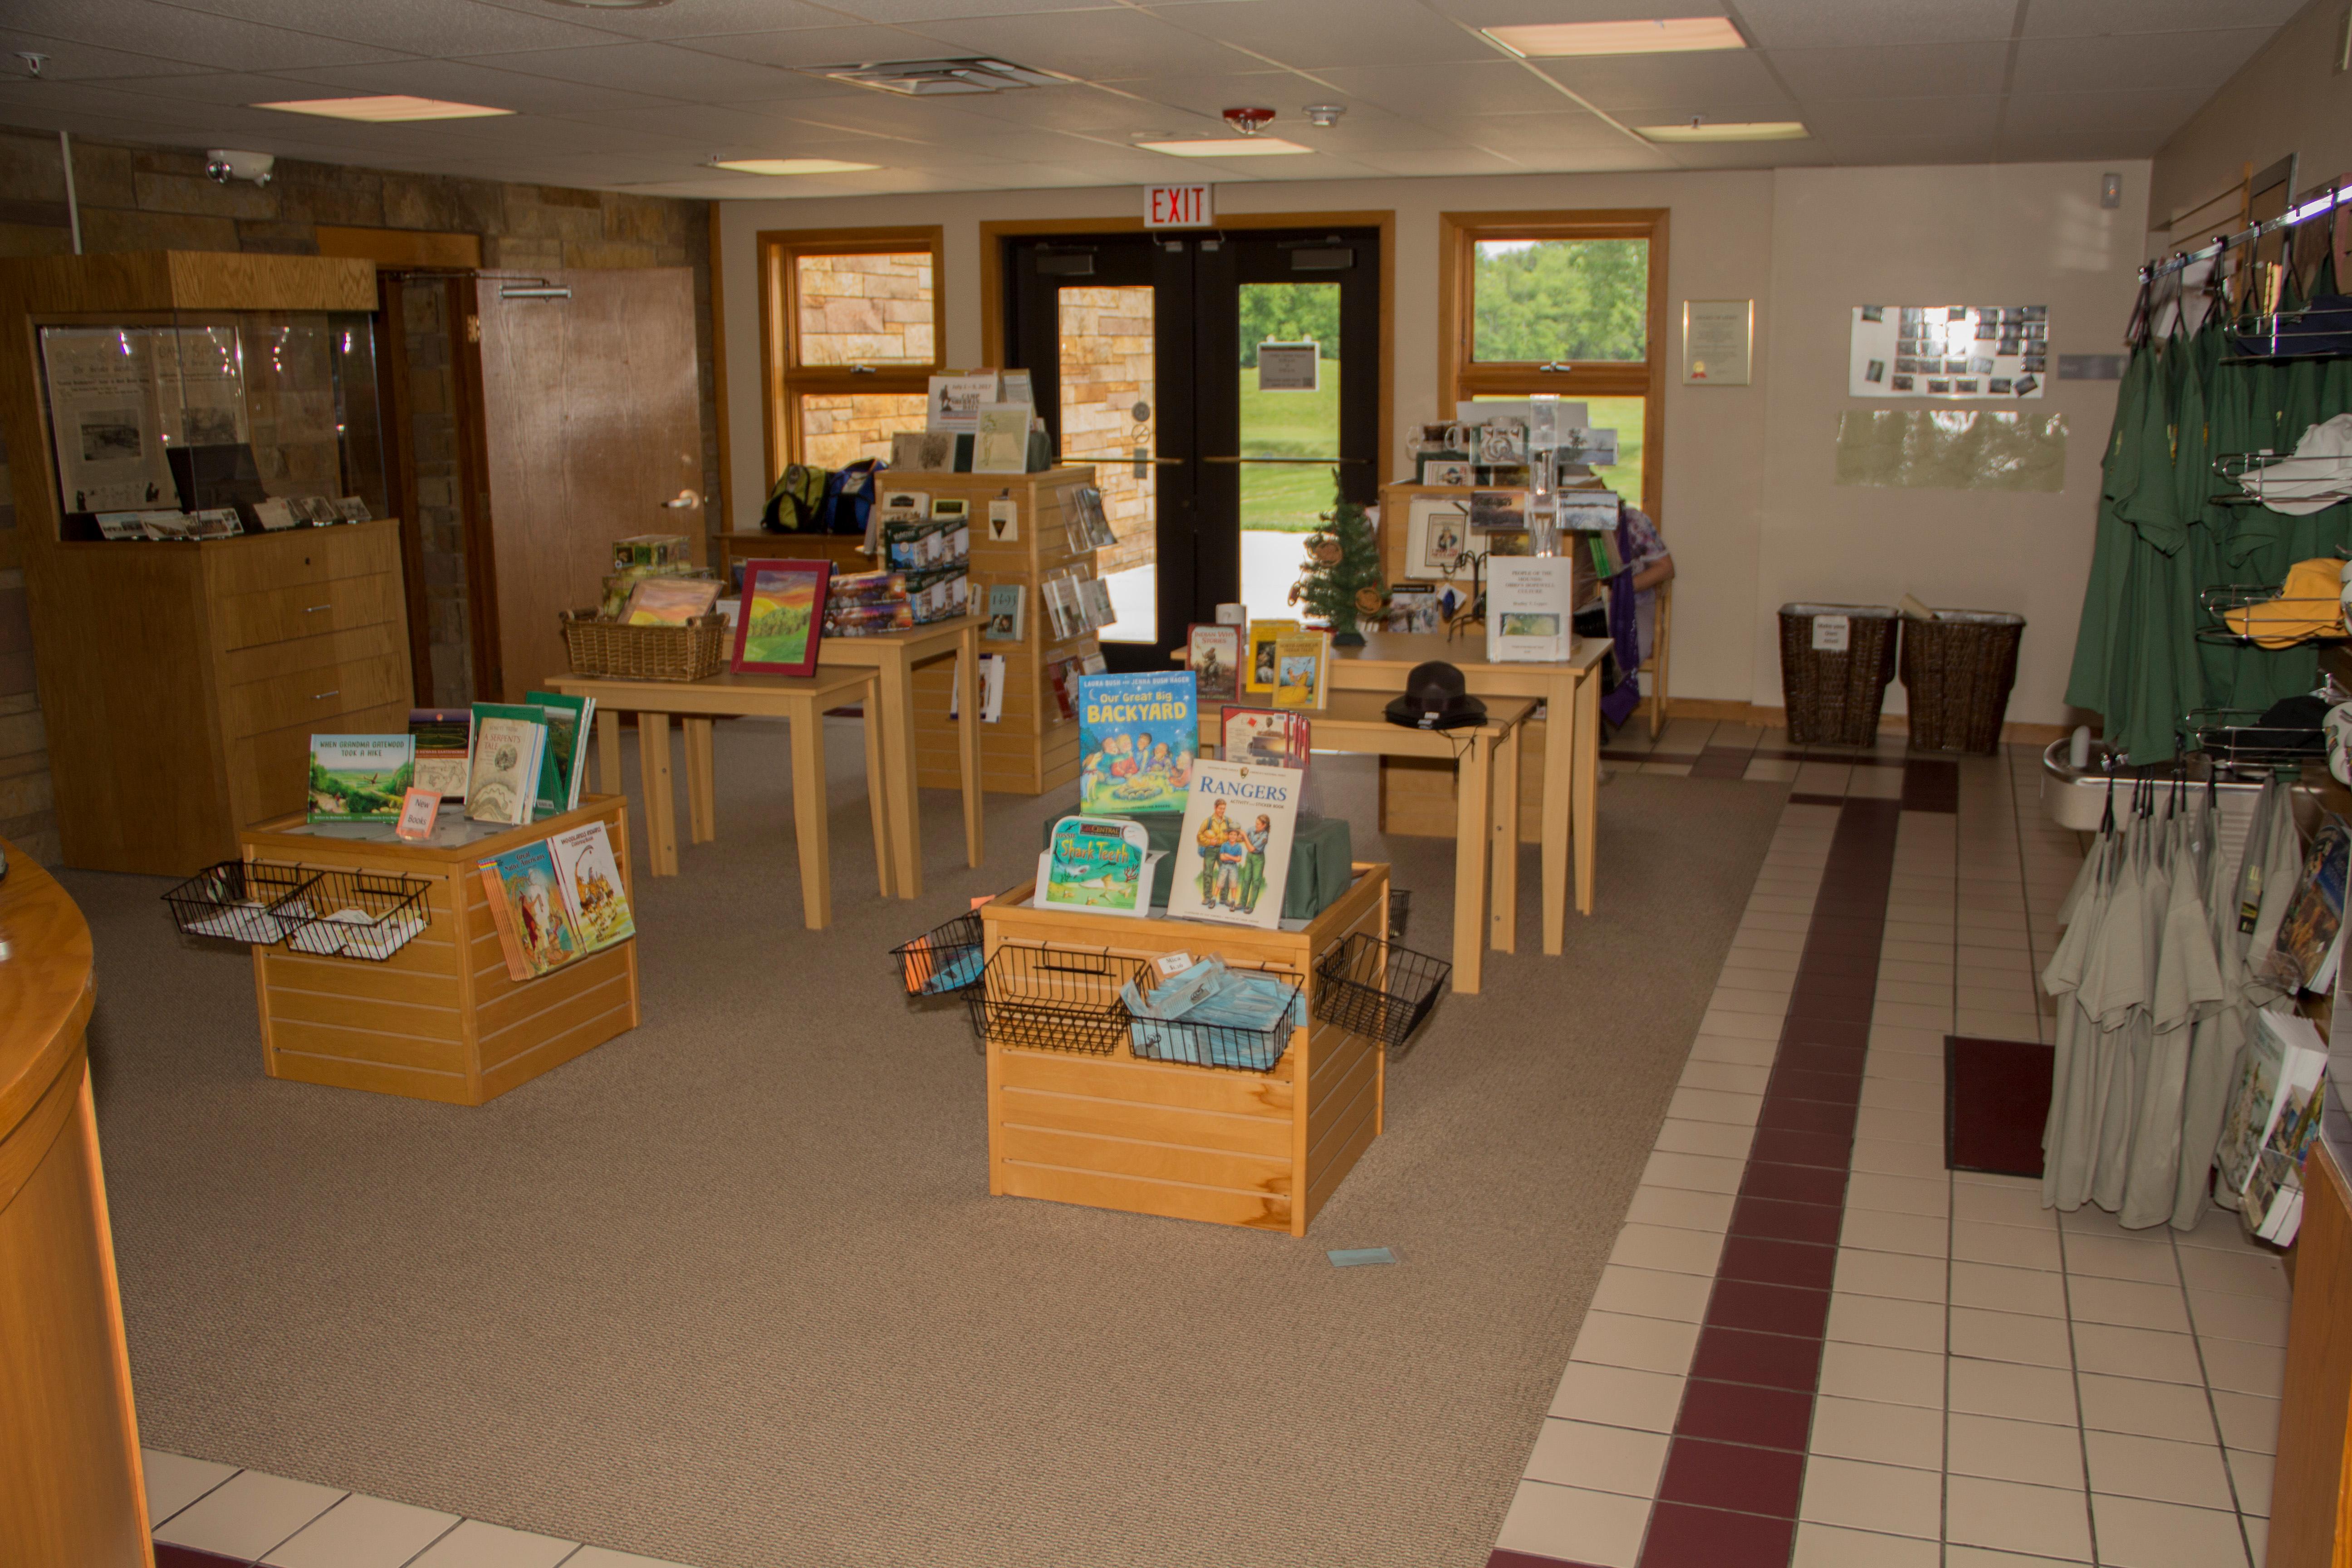 The Mound City Group bookstore